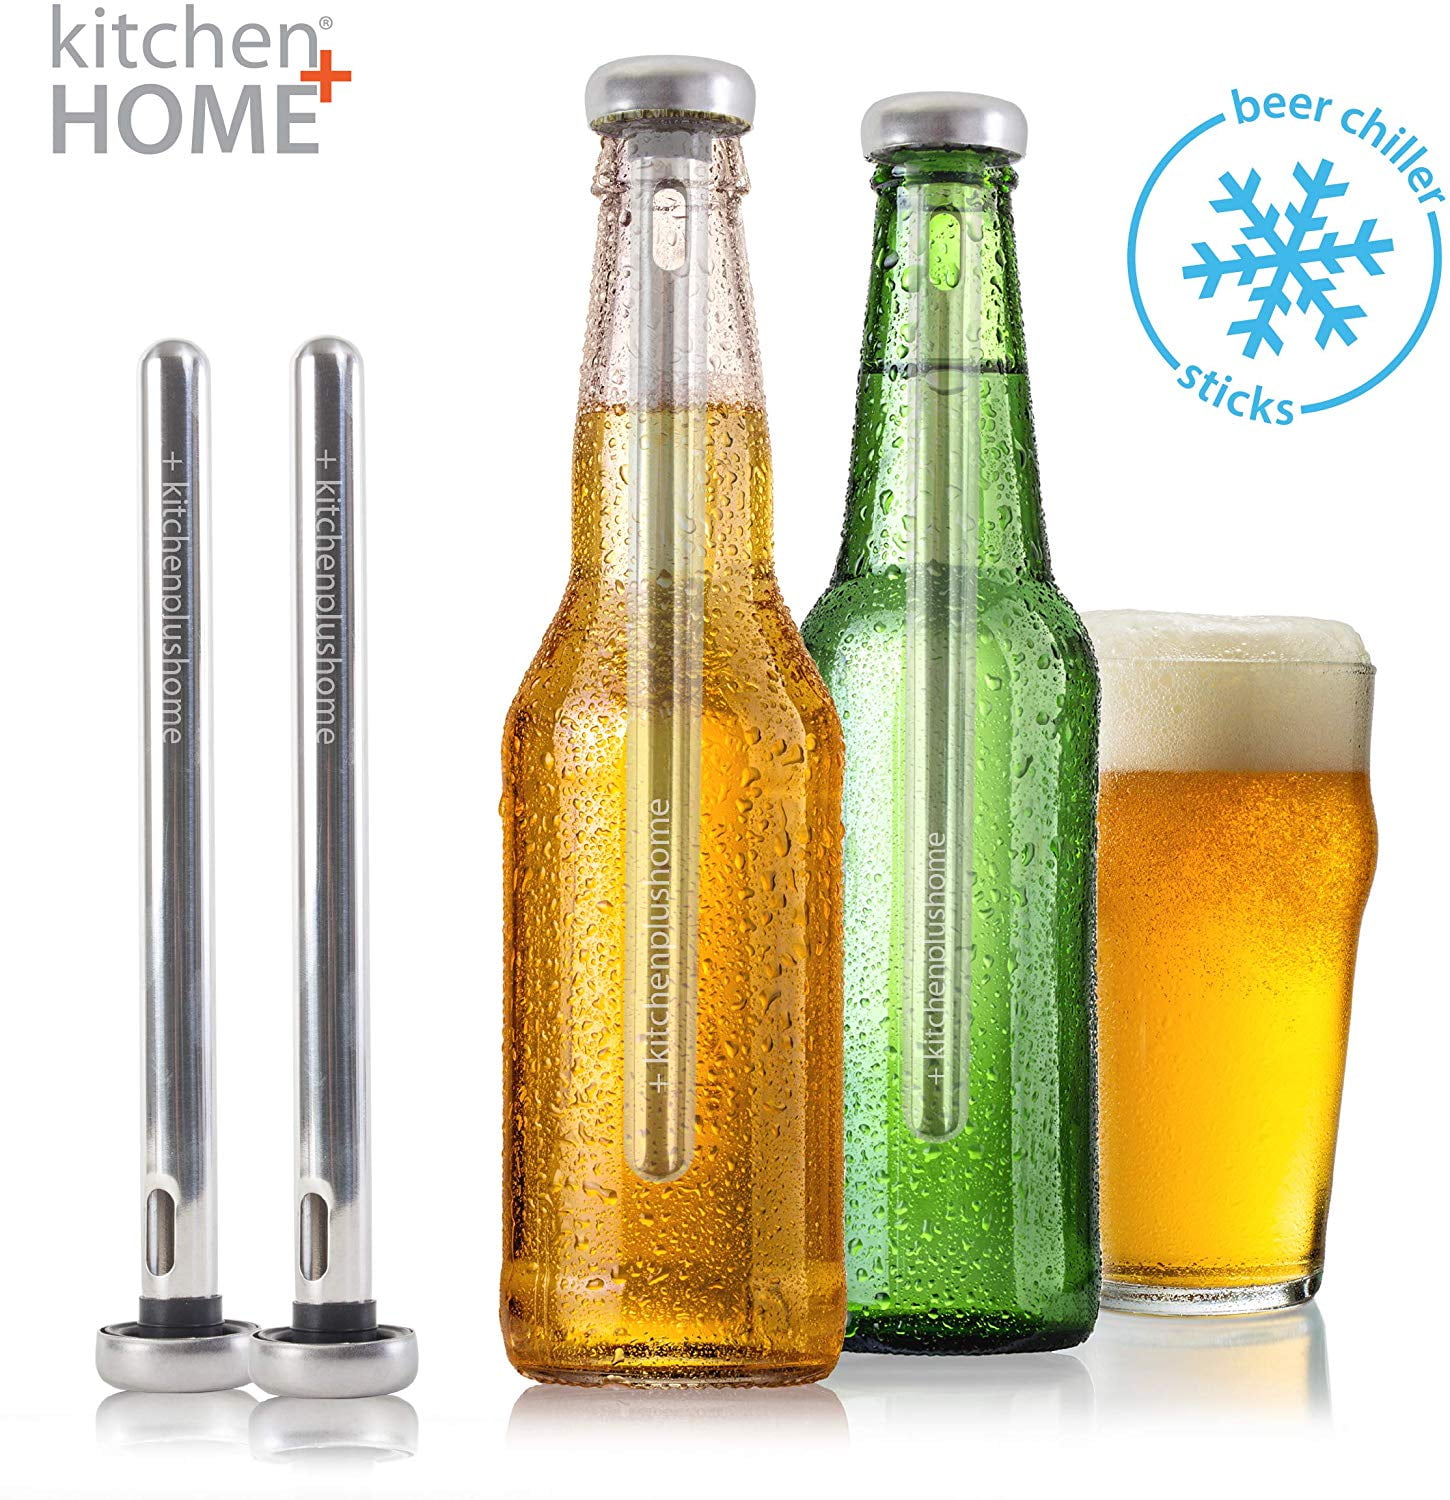 Chilling Stick Built-In Bottle Opener Stainless Steel Drink Chiller Sticks Keep Bottled Drinks Cold Beer Chiller By Chiller Industries Cools Beverage Without Watering It Down 2 Pack 